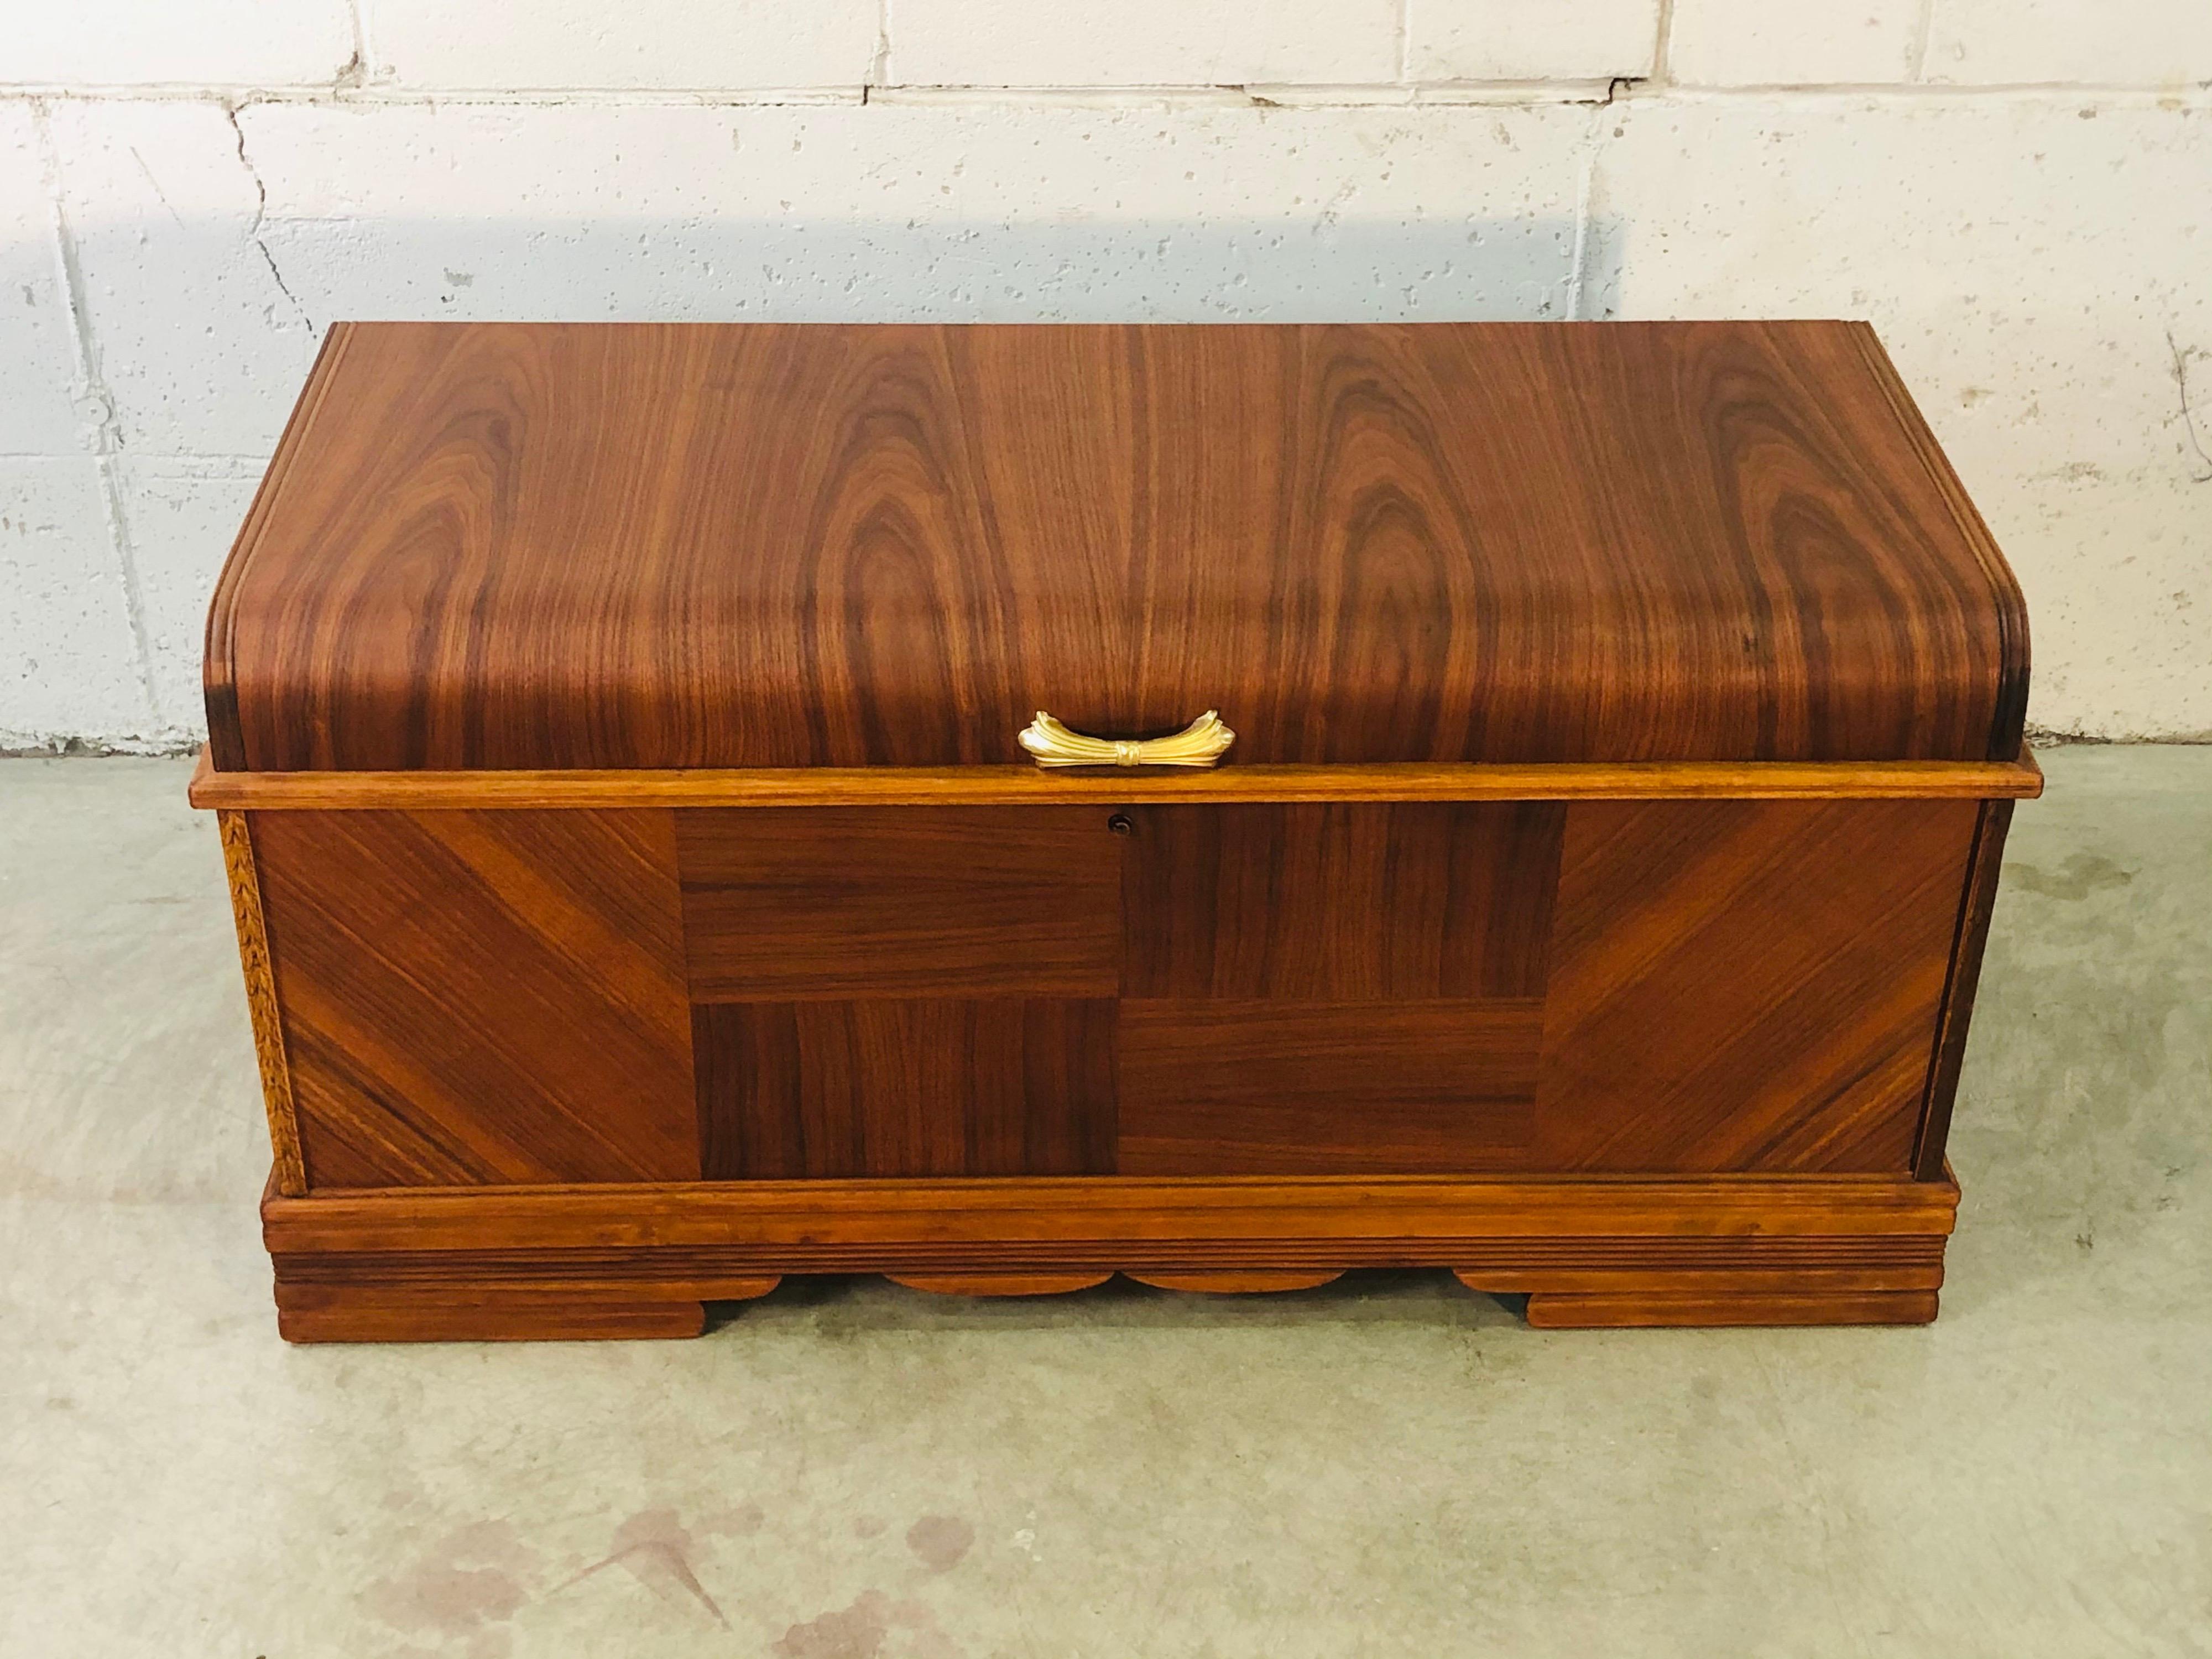 Vintage Art Deco waterfall style cedar blanket chest. The chest has a matchbook veneer finish with gold accent hardware. Cedar lined inside. Marked.